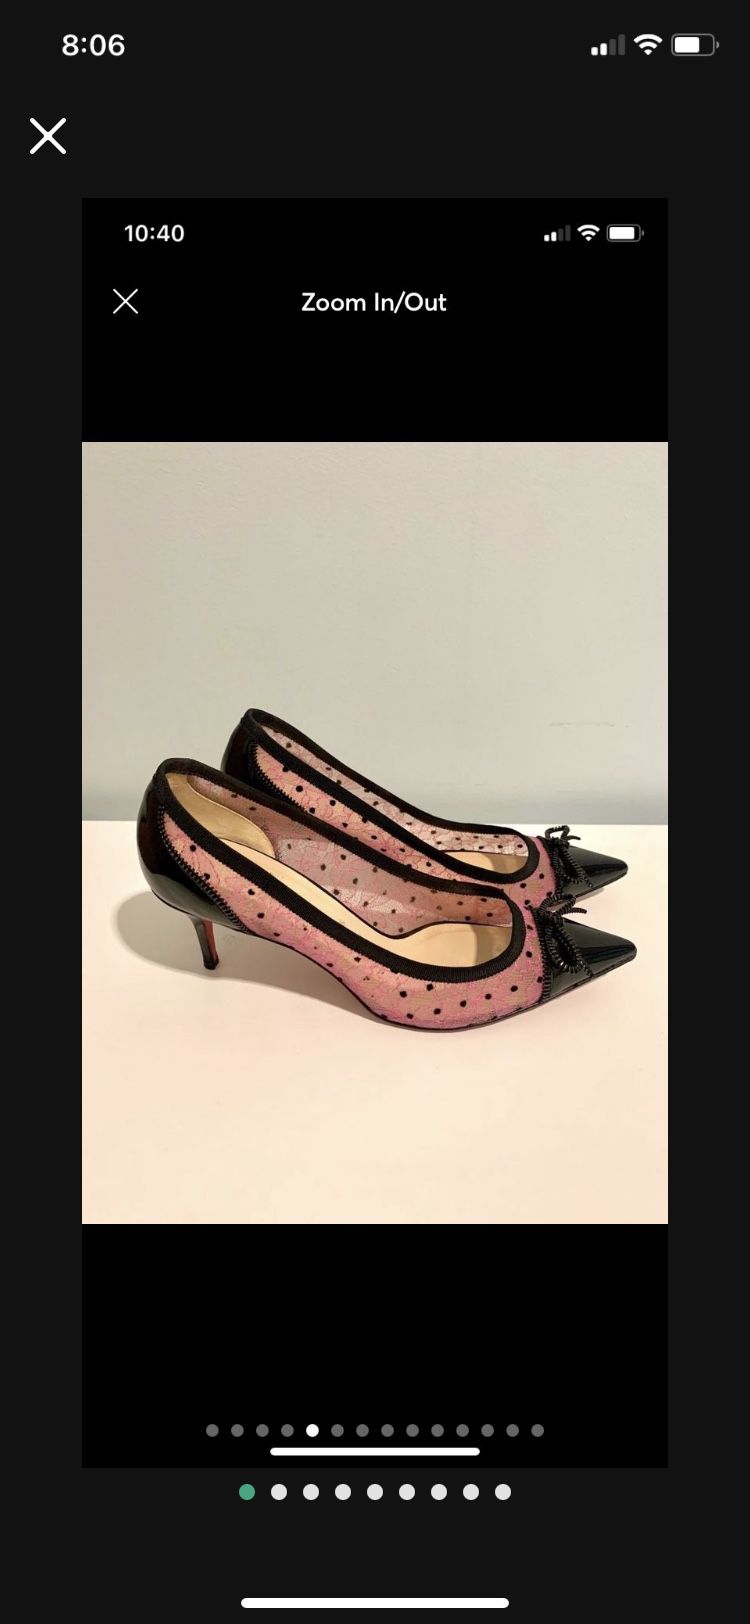 Authentic Louboutin Pink Lace Black Patent Leather Kitten Heel Pumps Shoes 